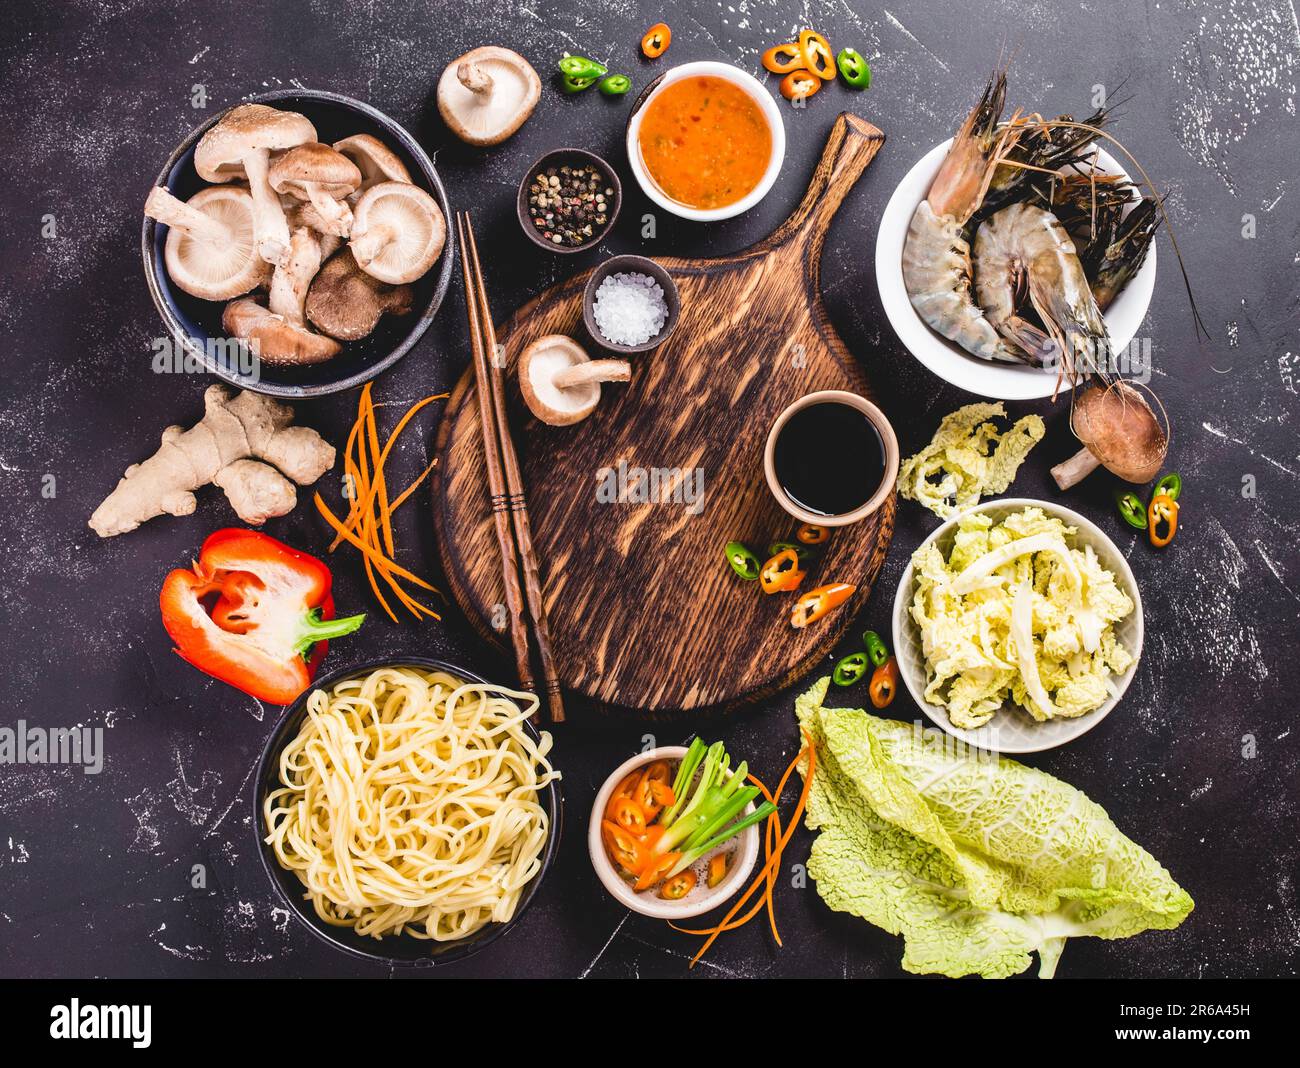 Asian food cooking concept. Empty wooden board, noodles, vegetables stir fry, shrimps, sauces, chopsticks. Asian/Chinese food. Top view. Ingredients Stock Photo